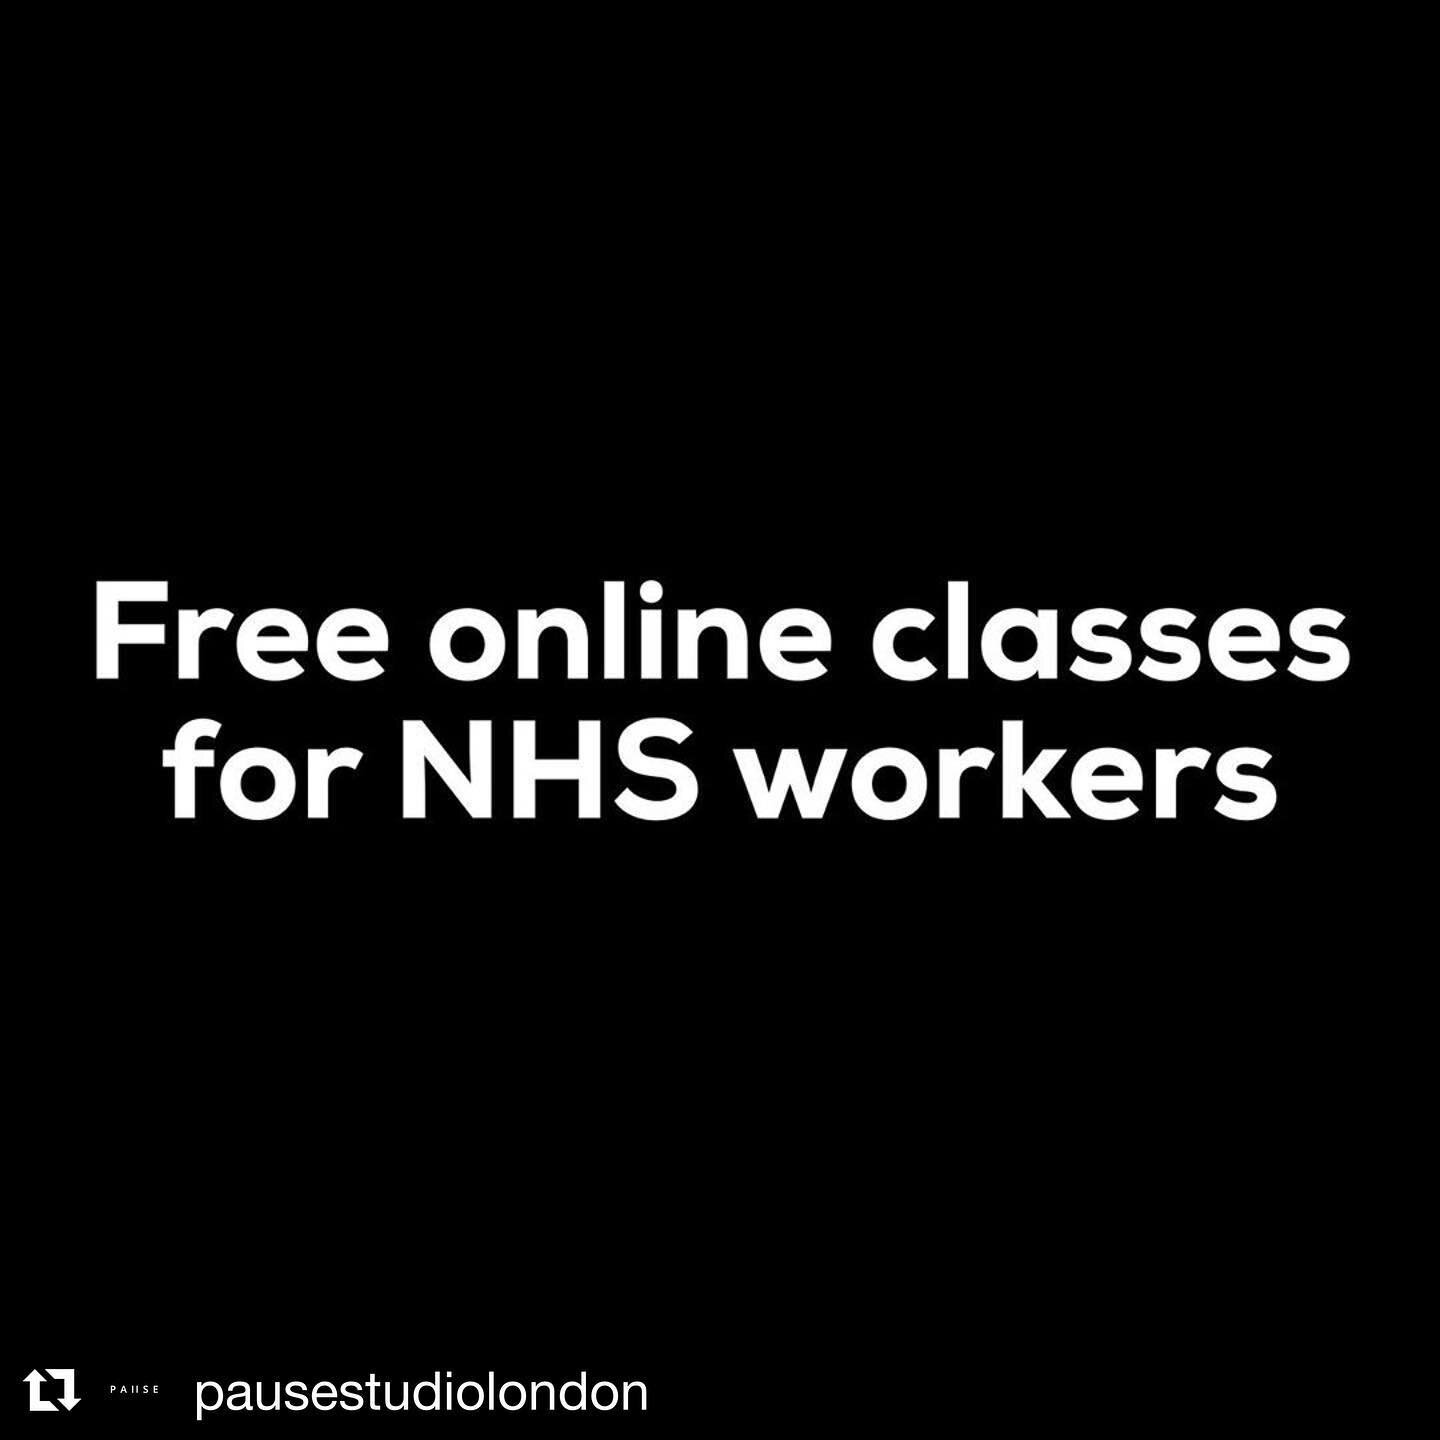 #Repost @pausestudiolondon with @get_repost
・・・
To all the NHS workers out there, thank you, from all of us. We see how hard you&rsquo;re working and what a toll this is taking on your physical and mental wellbeing. If you have the time or the energy